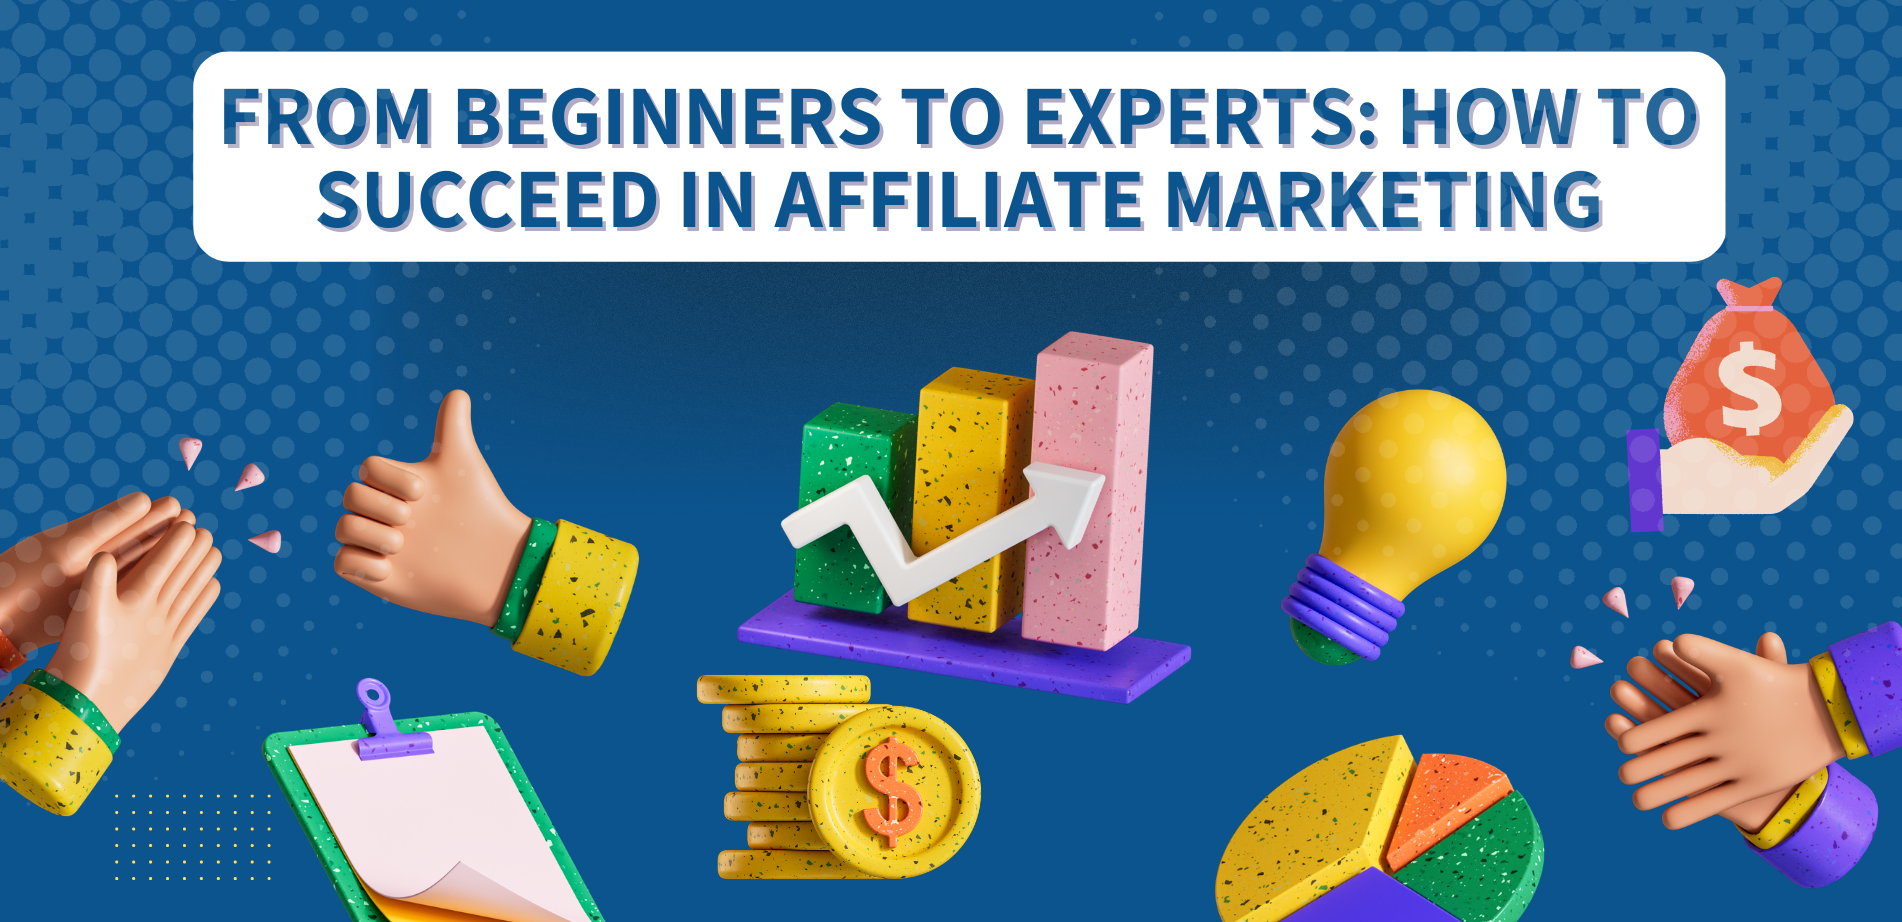 From Beginners to Experts: How to Succeed in Affiliate Marketing